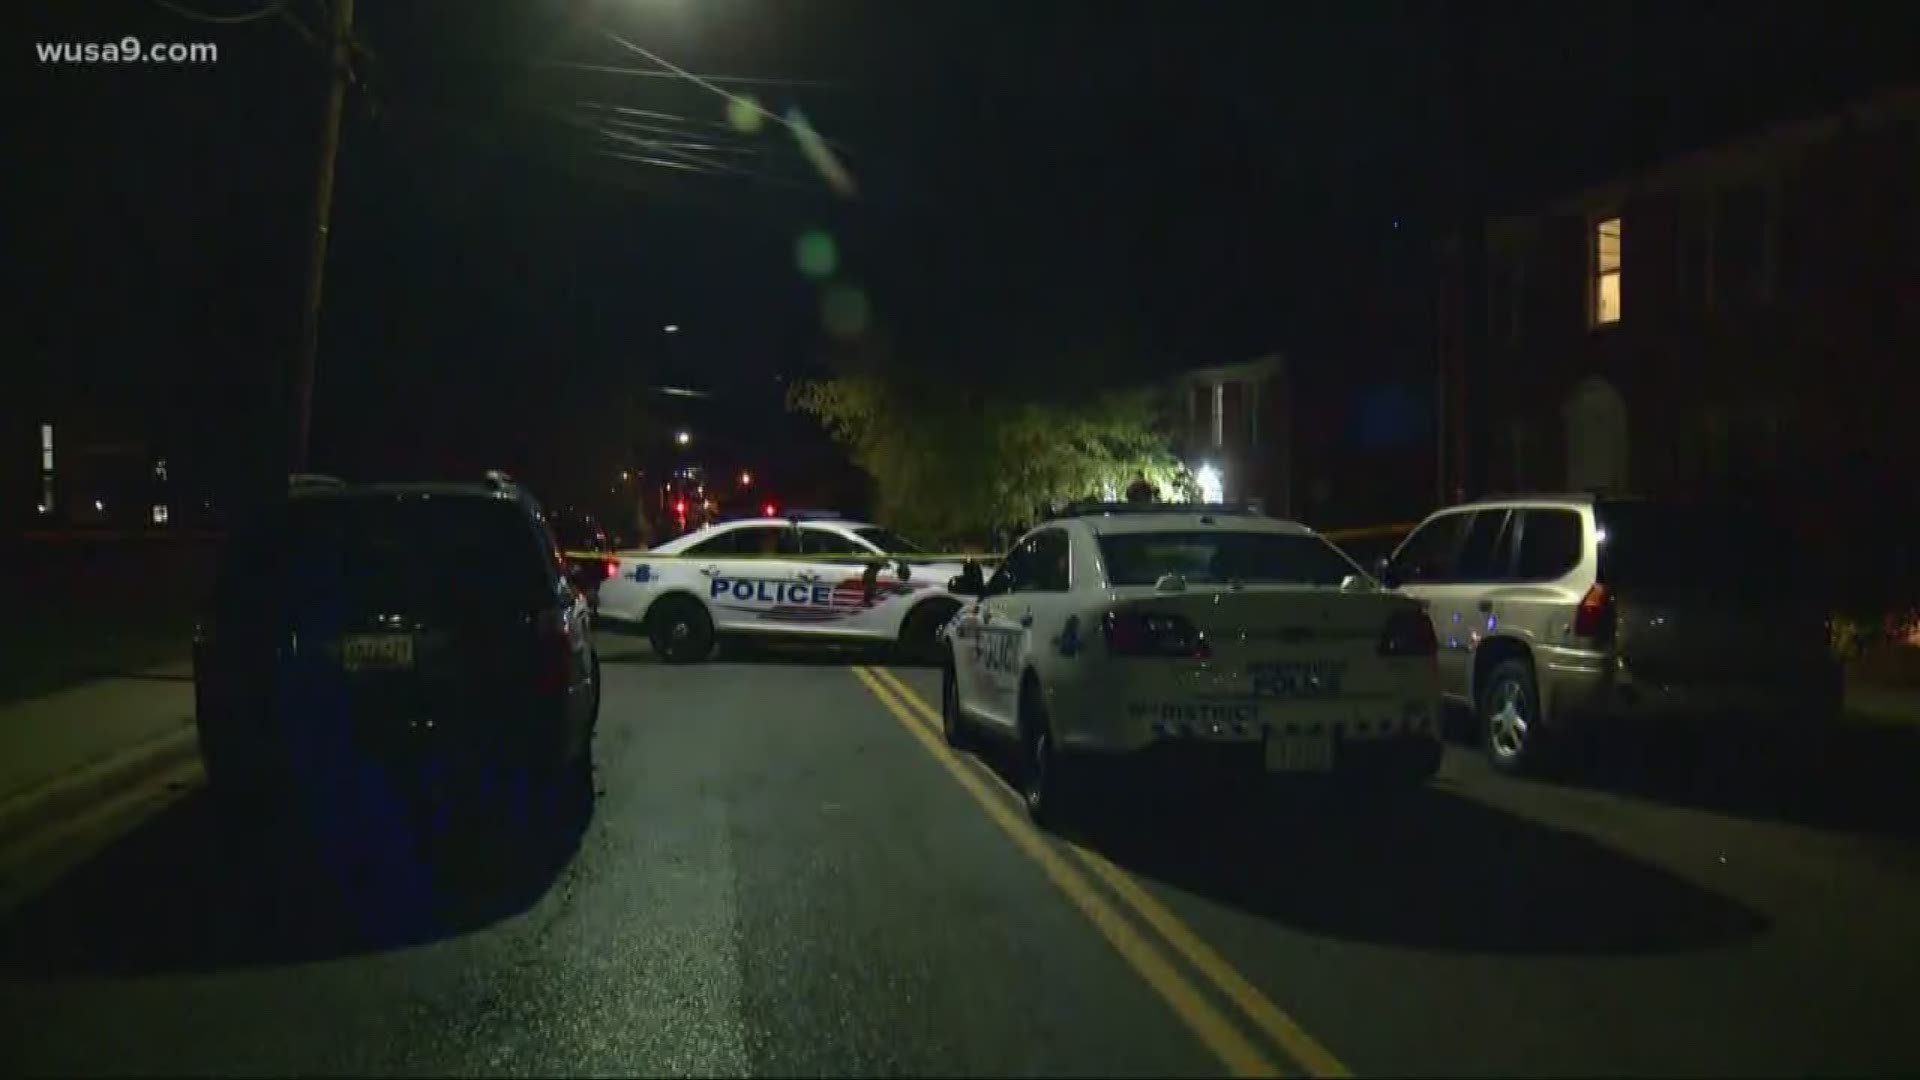 The off-duty police shot an adult male and a teen boy Friday in the 300 block of Anacostia Road, SE.